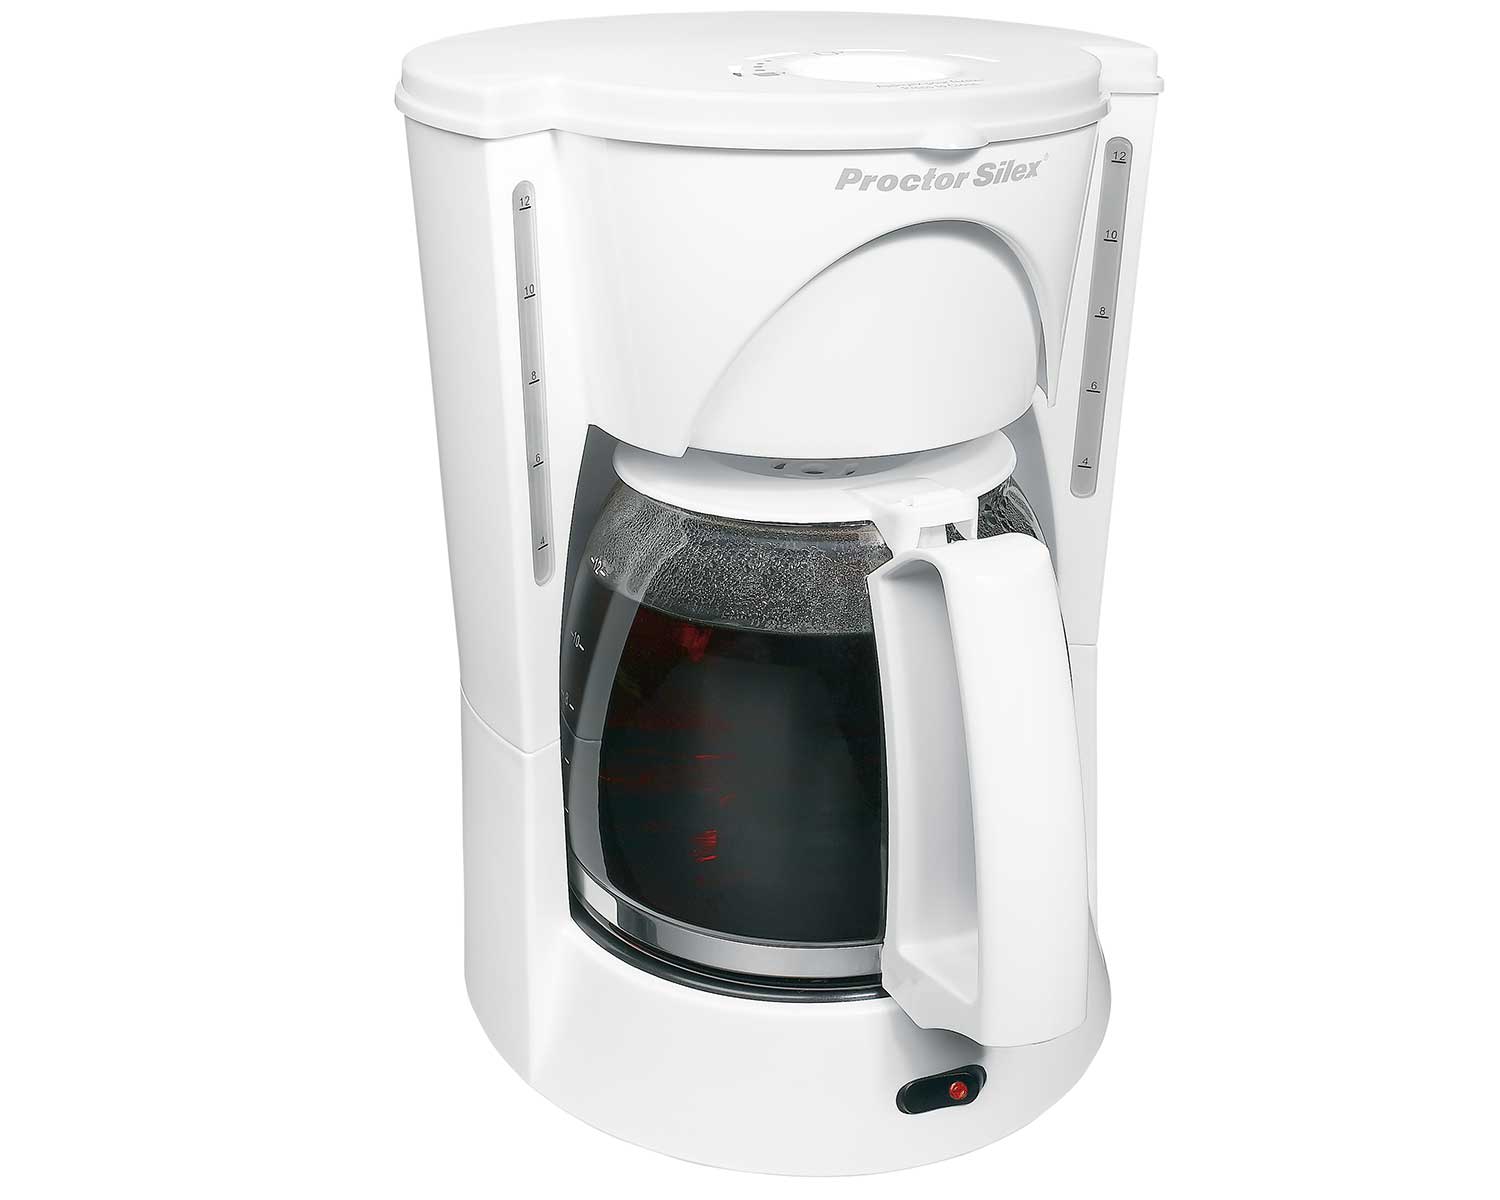  P.. Proctor-Silex Automatic Drip Coffee Maker 2-12 Cup